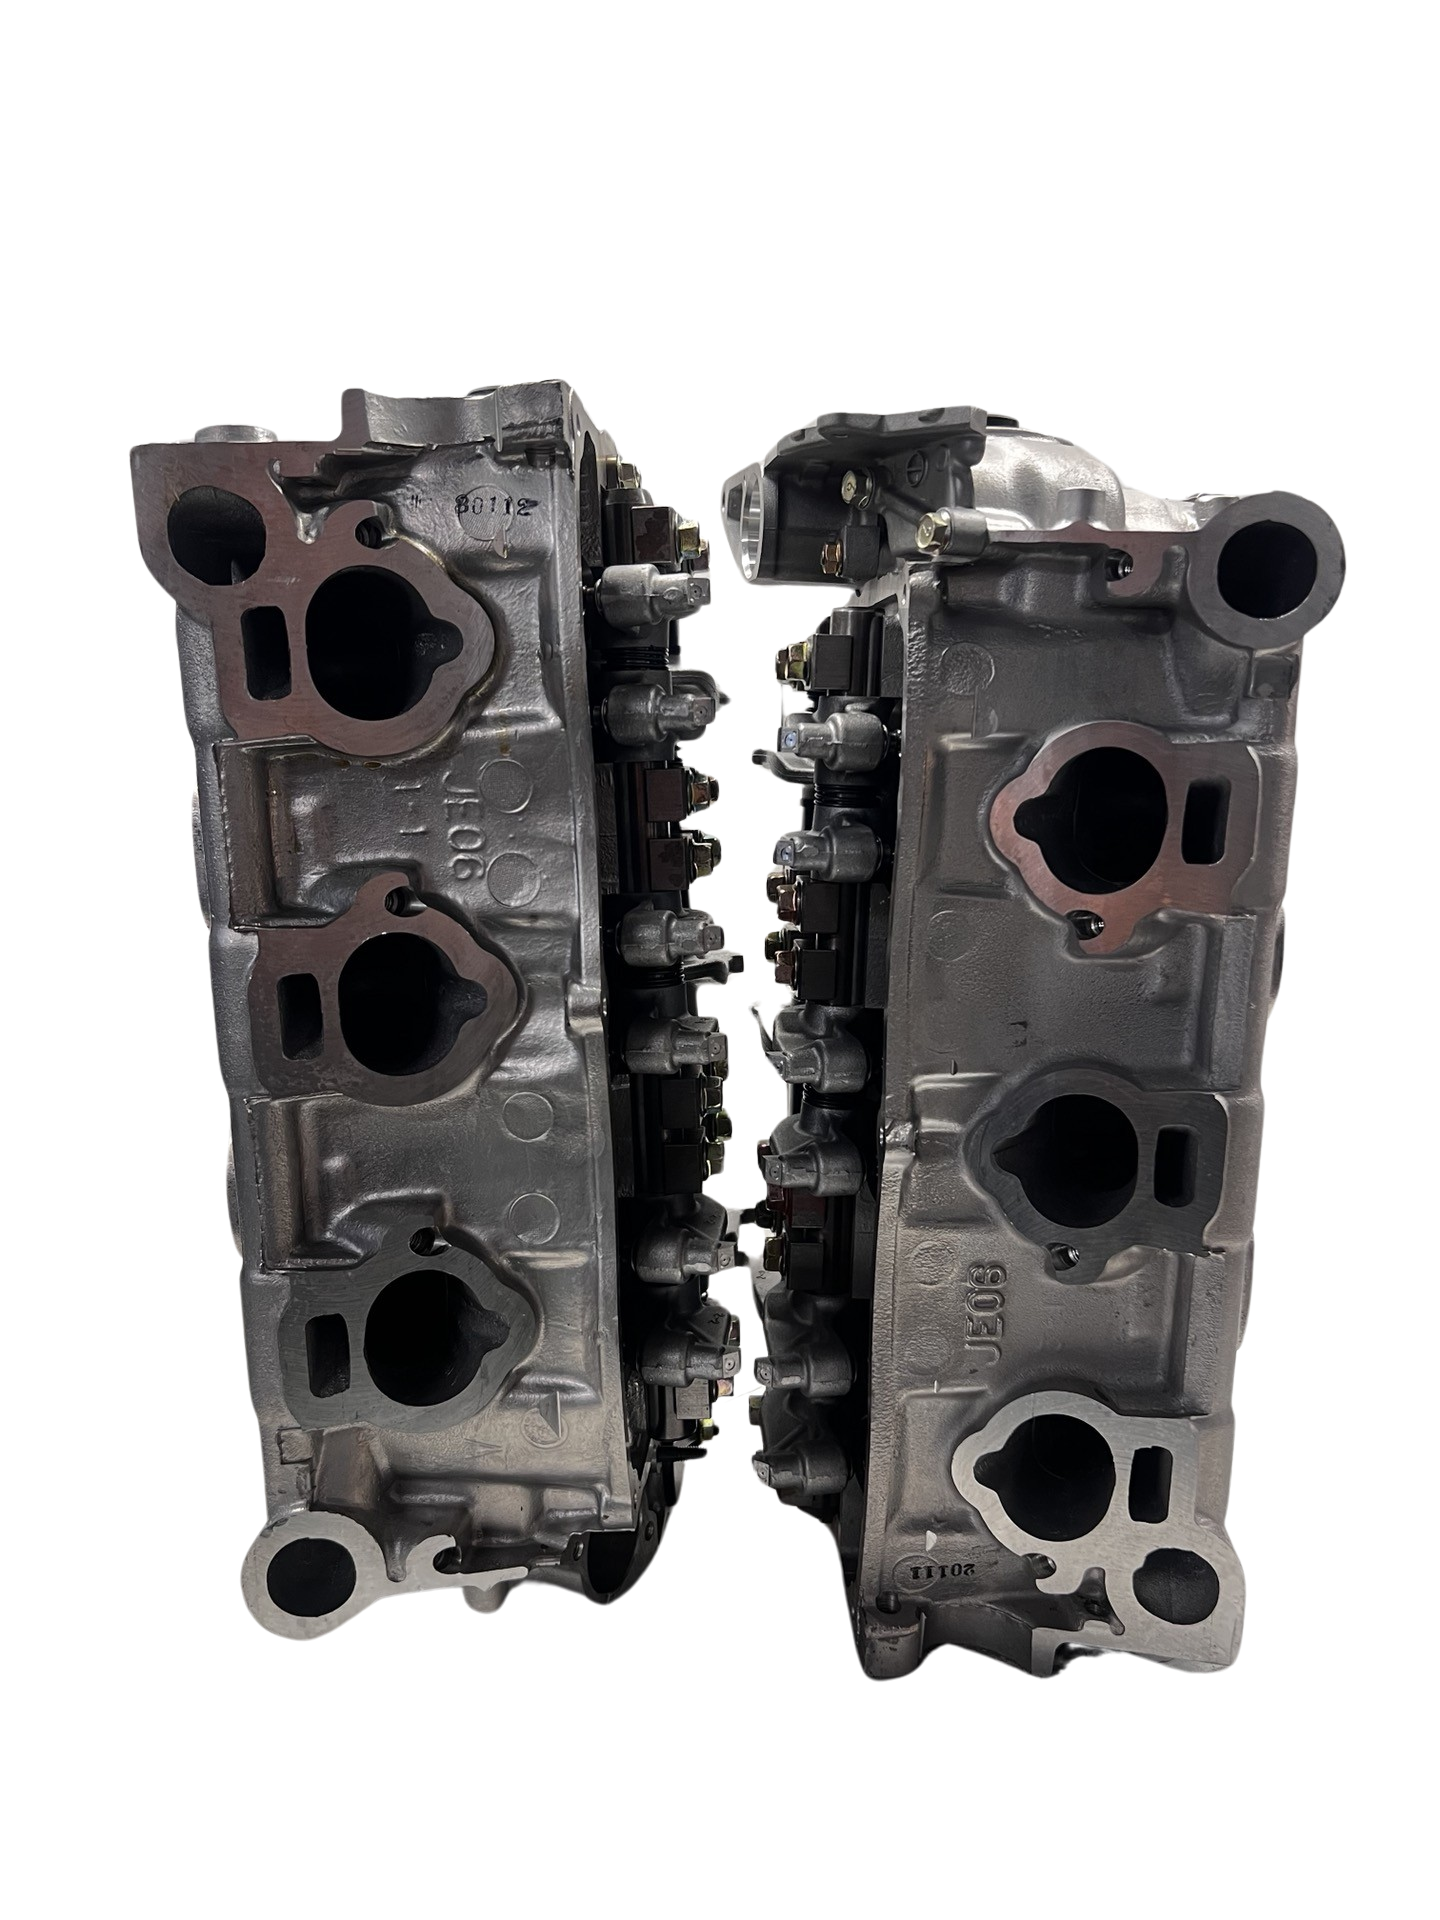 Intake side of cylinder head for a NEW Mazda 3.0L Casting #JE06 (SOLD IN PAIR)